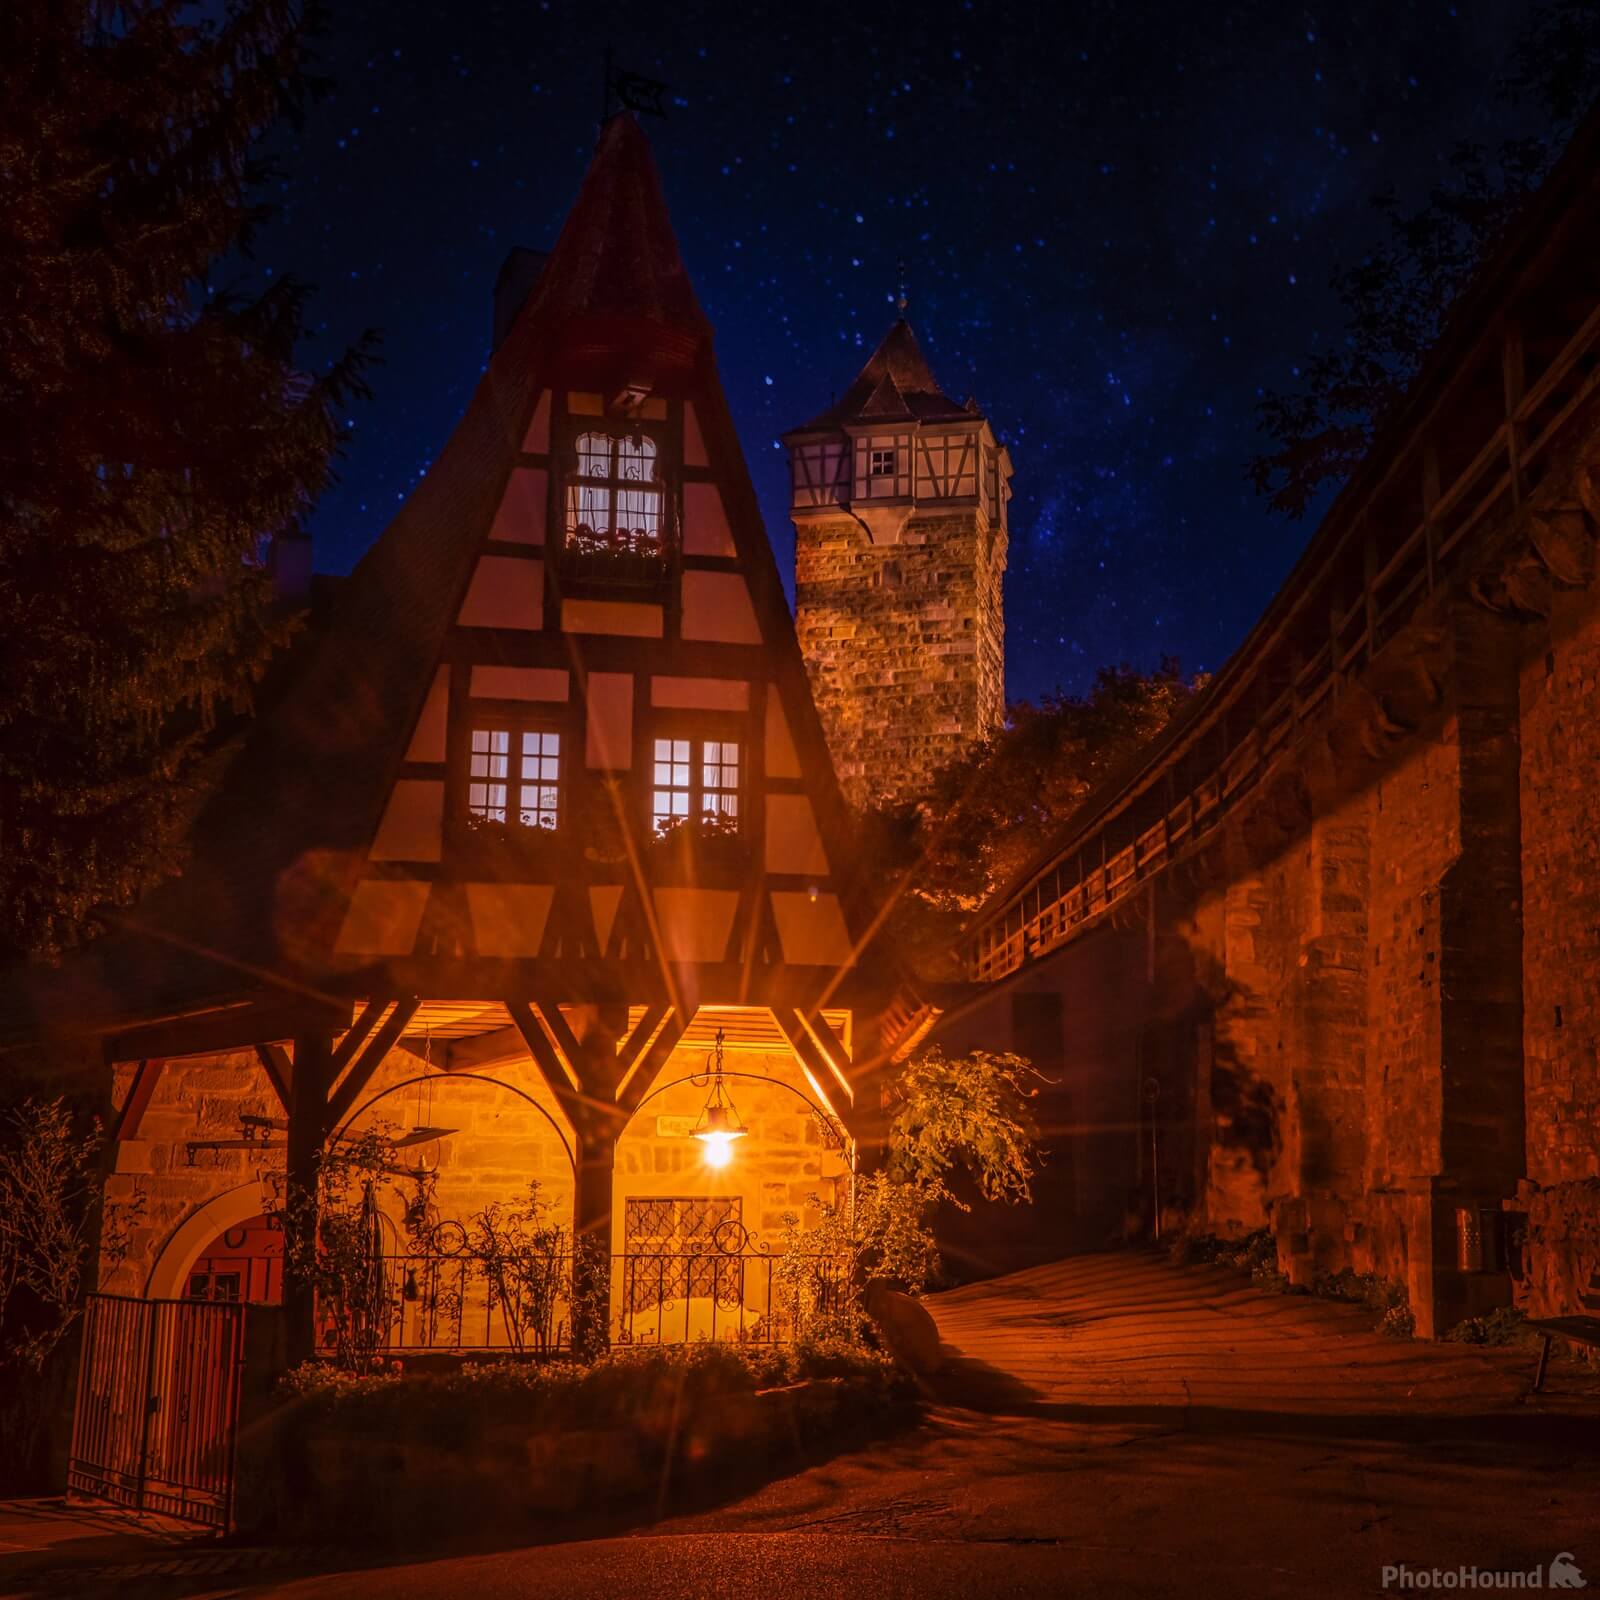 Image of Gerlachschmiede by Michael Unruh